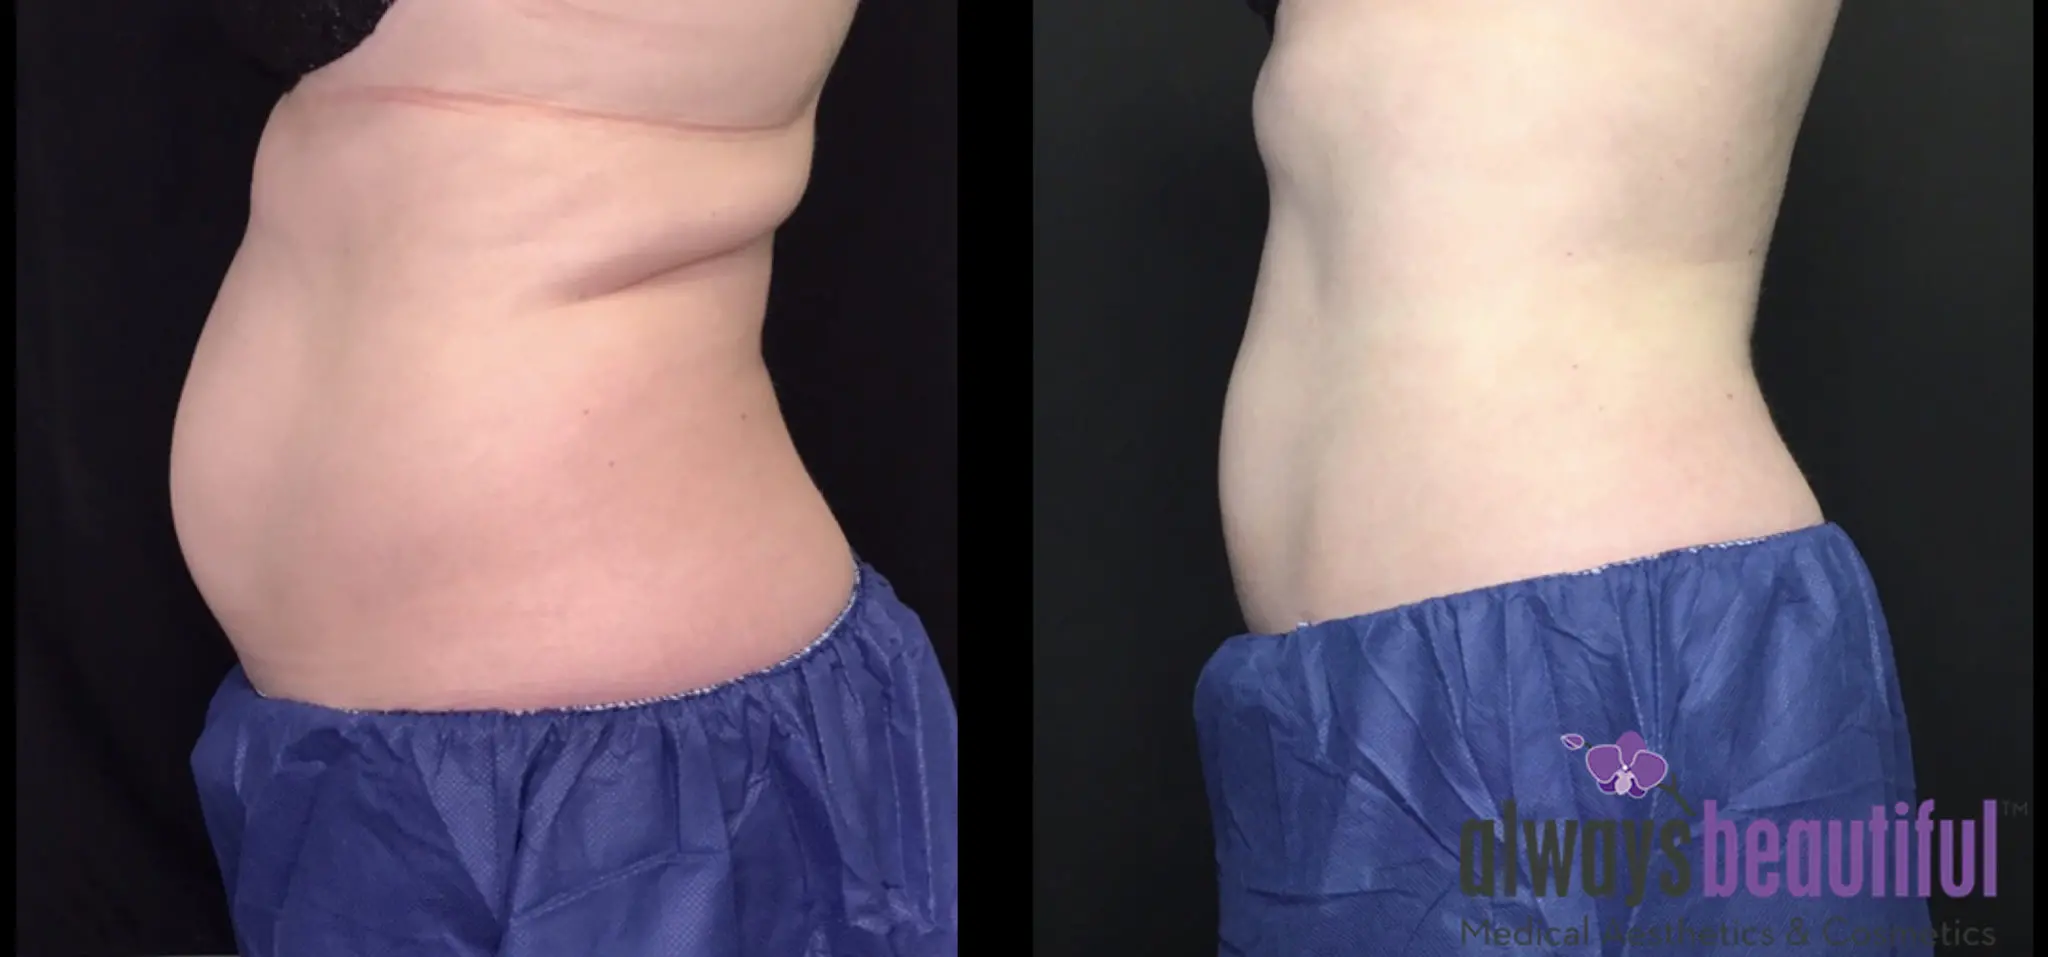 Coolsculpting on the abdomen.